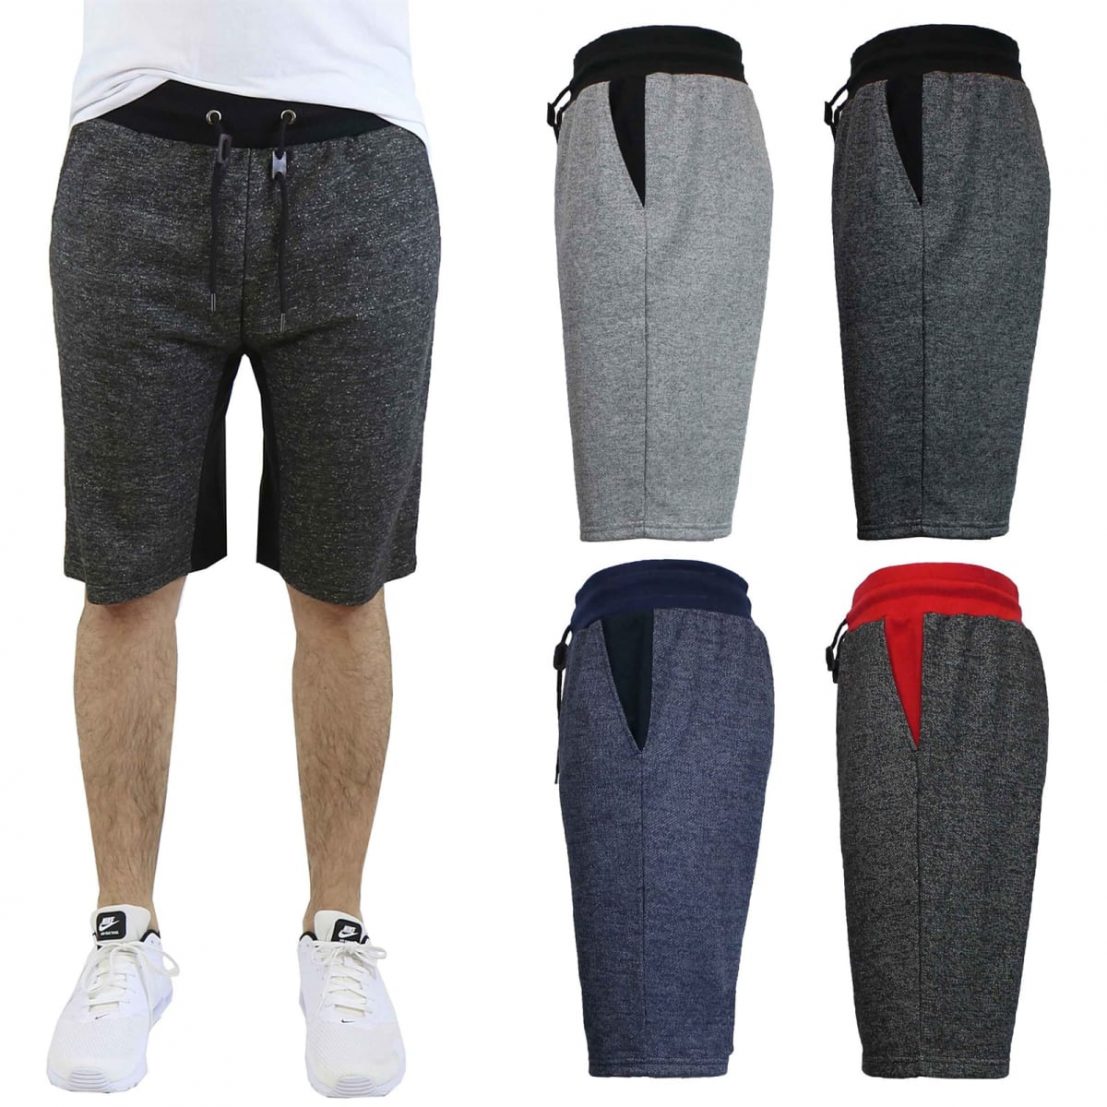 Men’s Slim-Fit Marled French Terry Shorts for $11.98 Shipped! *Each ...